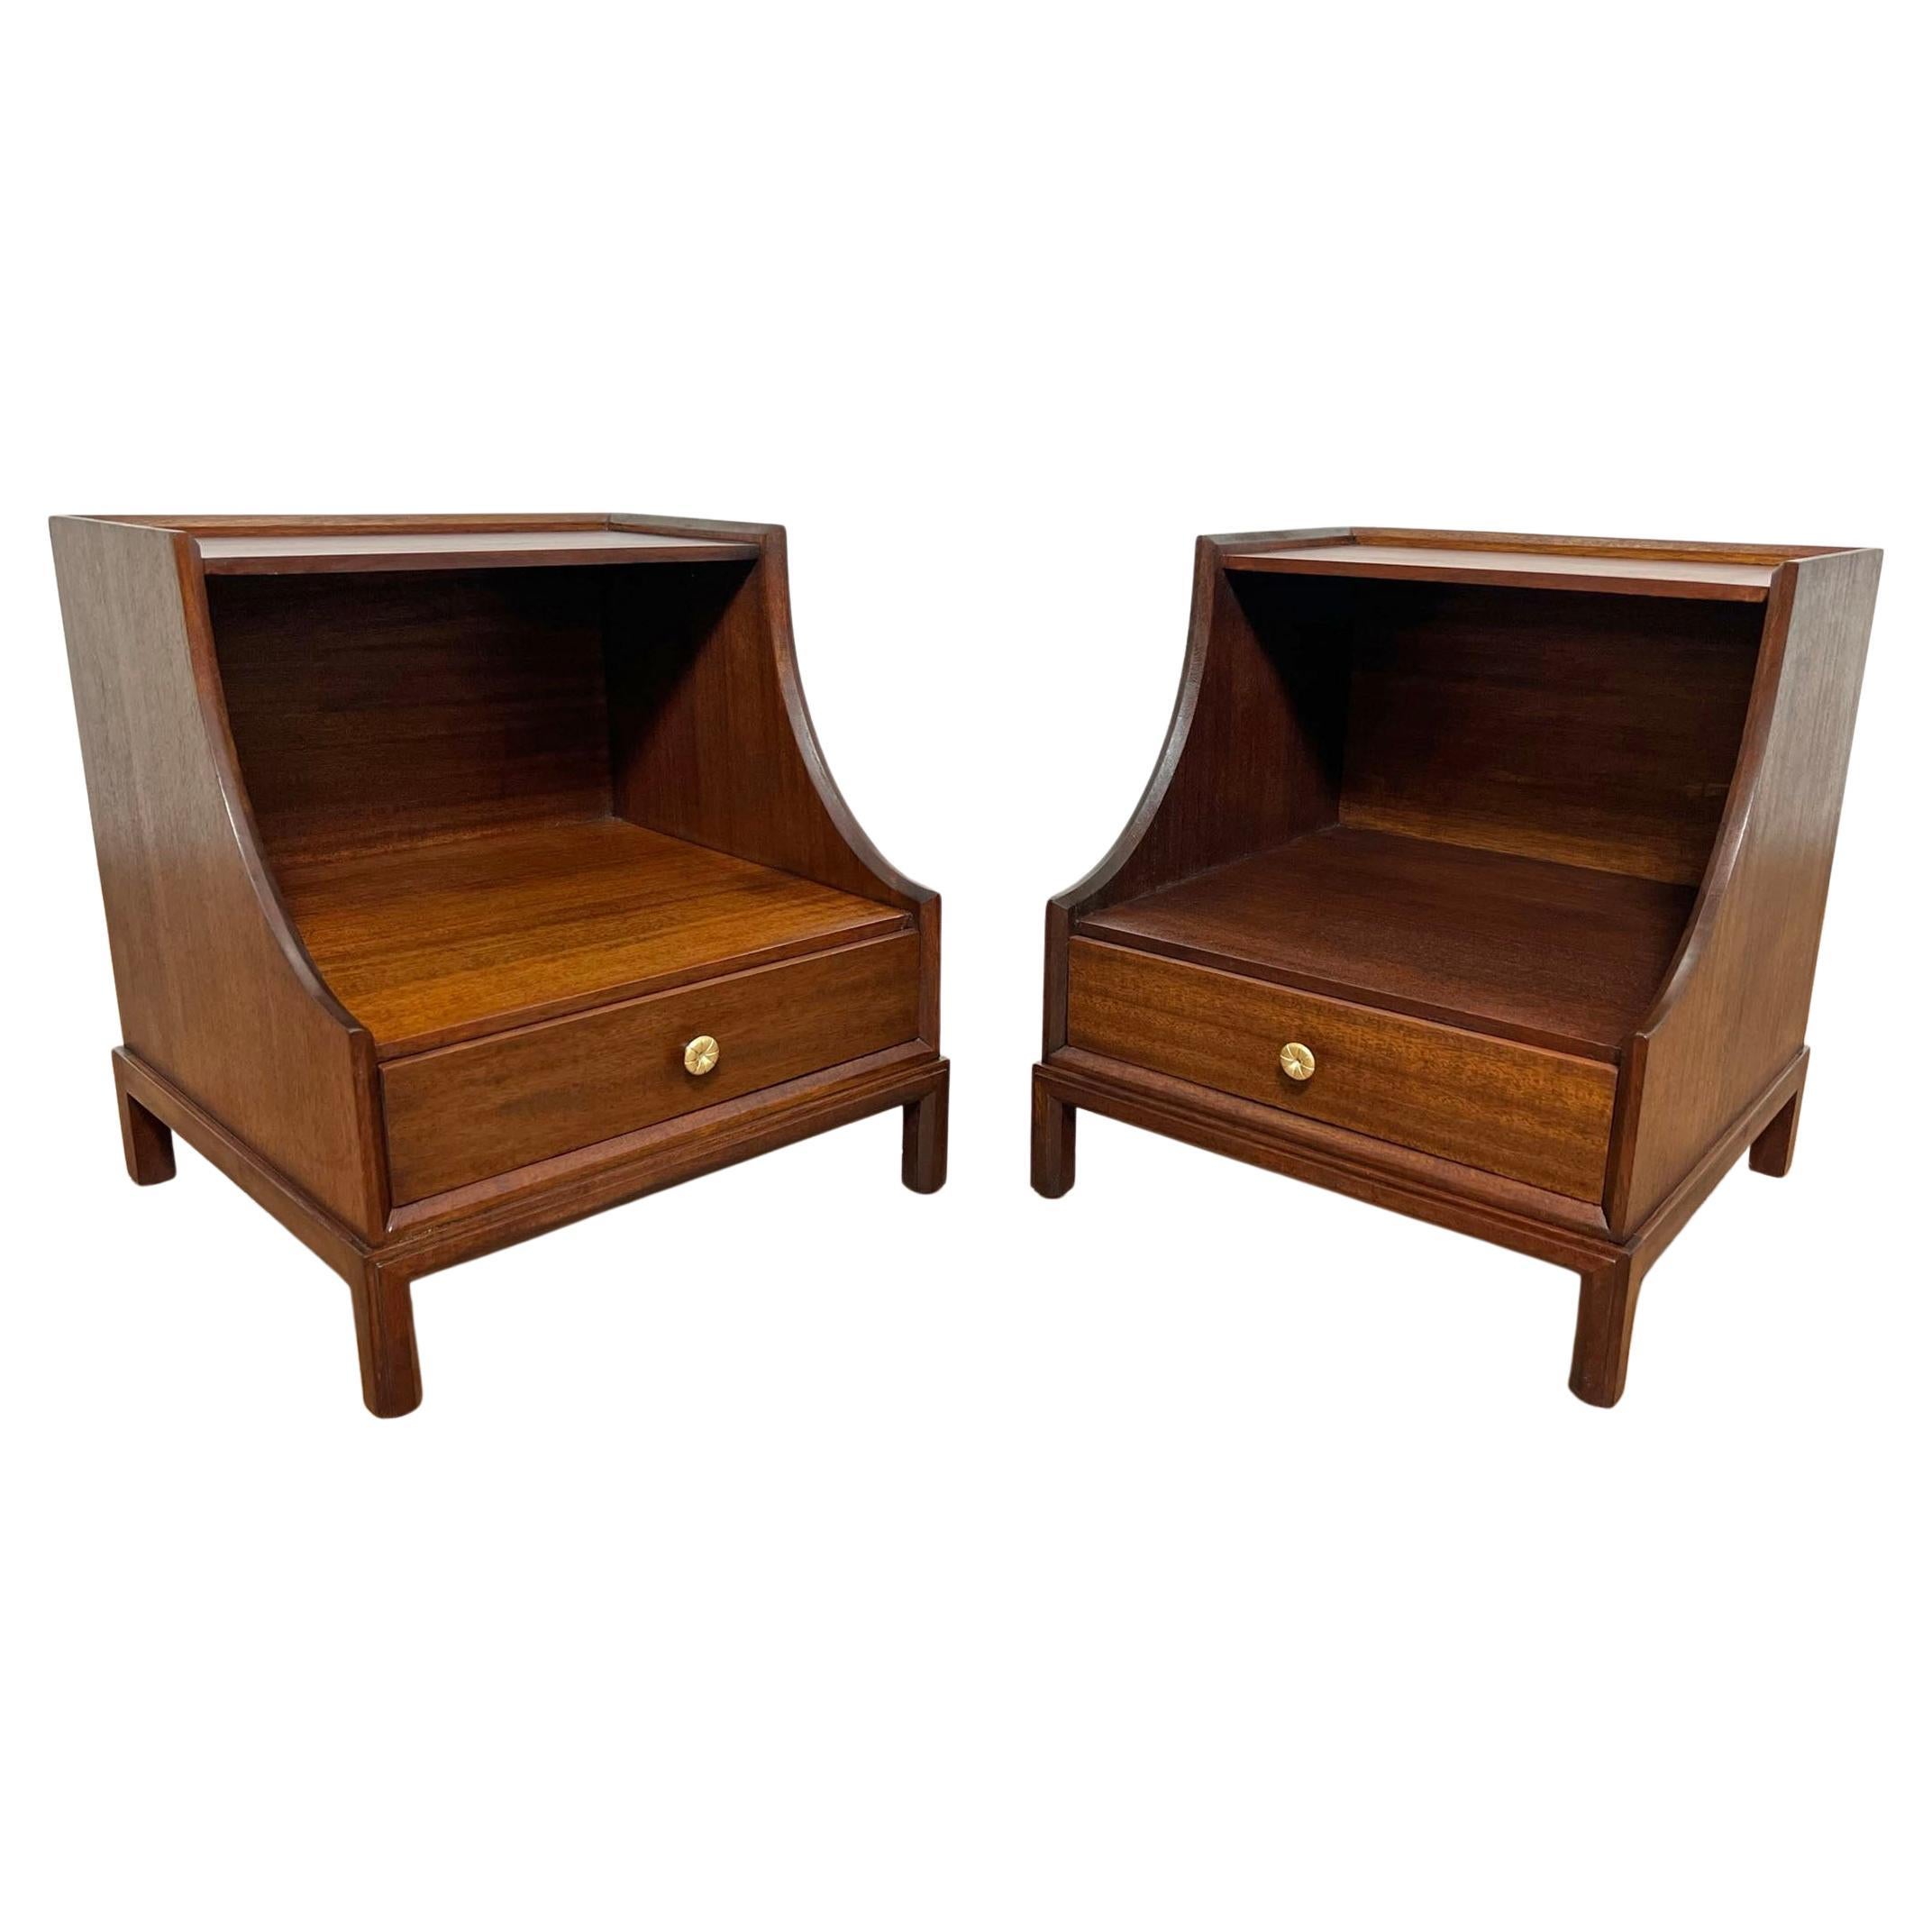 Pair of Tommi Parzinger for Charak Modern Night Stands, circa 1950s For Sale